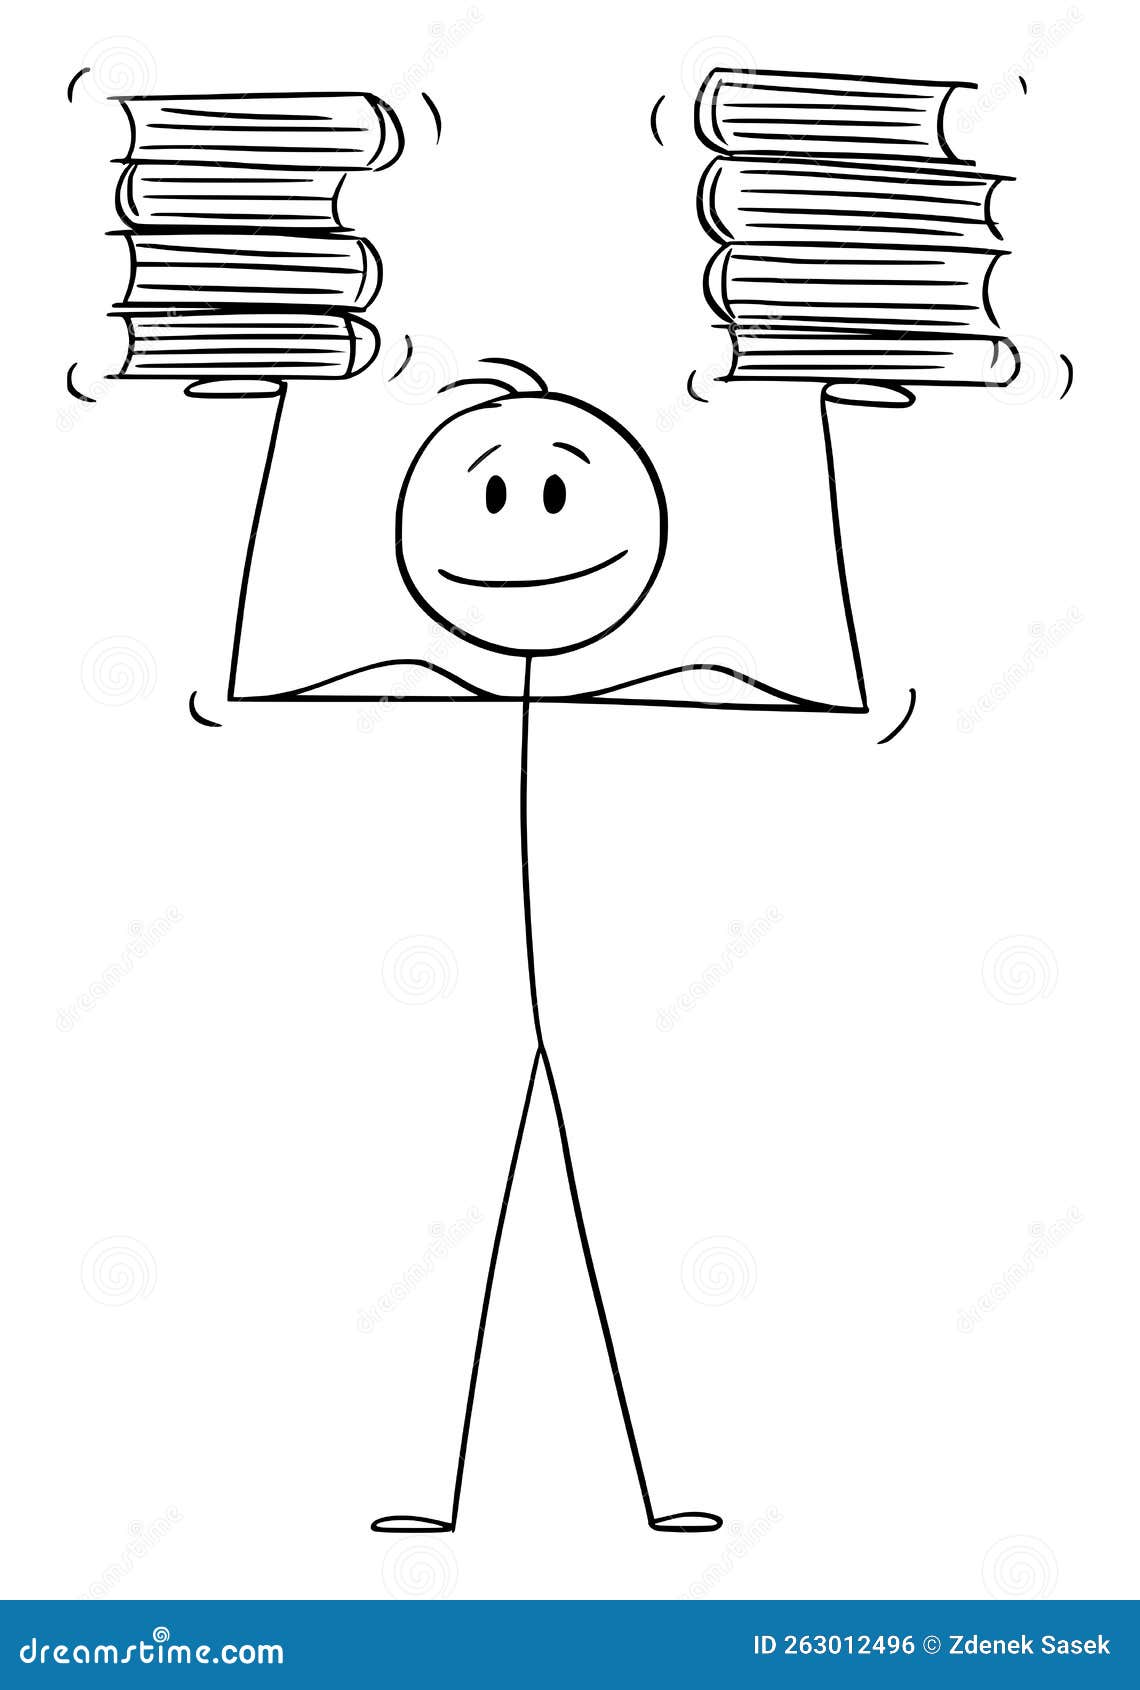 strong person holding books,  cartoon stick figure 